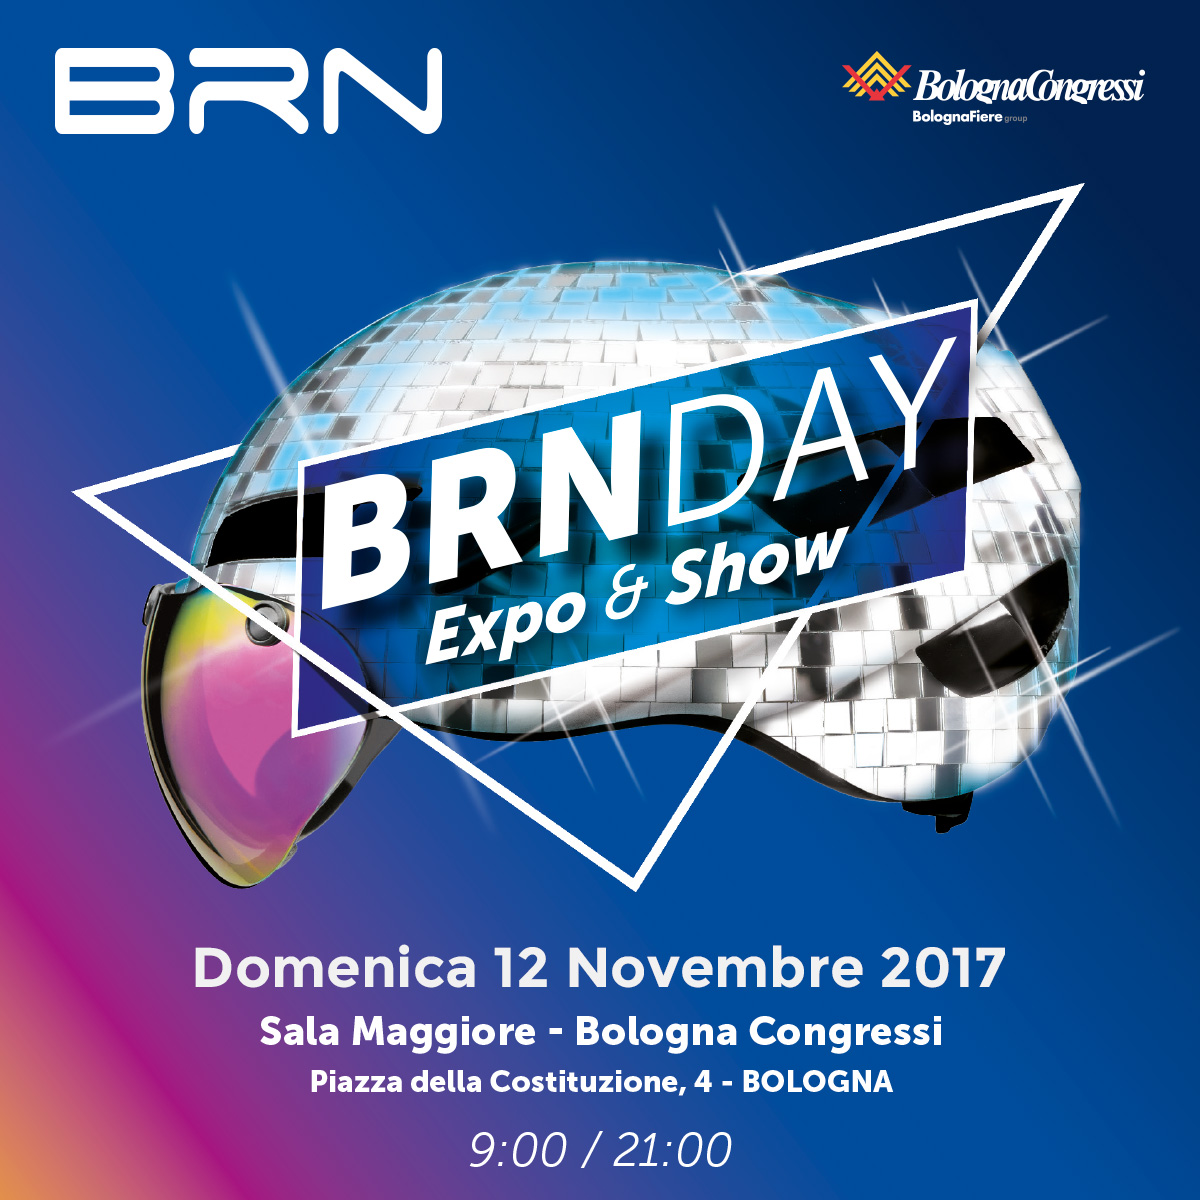 BRN DAY Expo & Show 2017